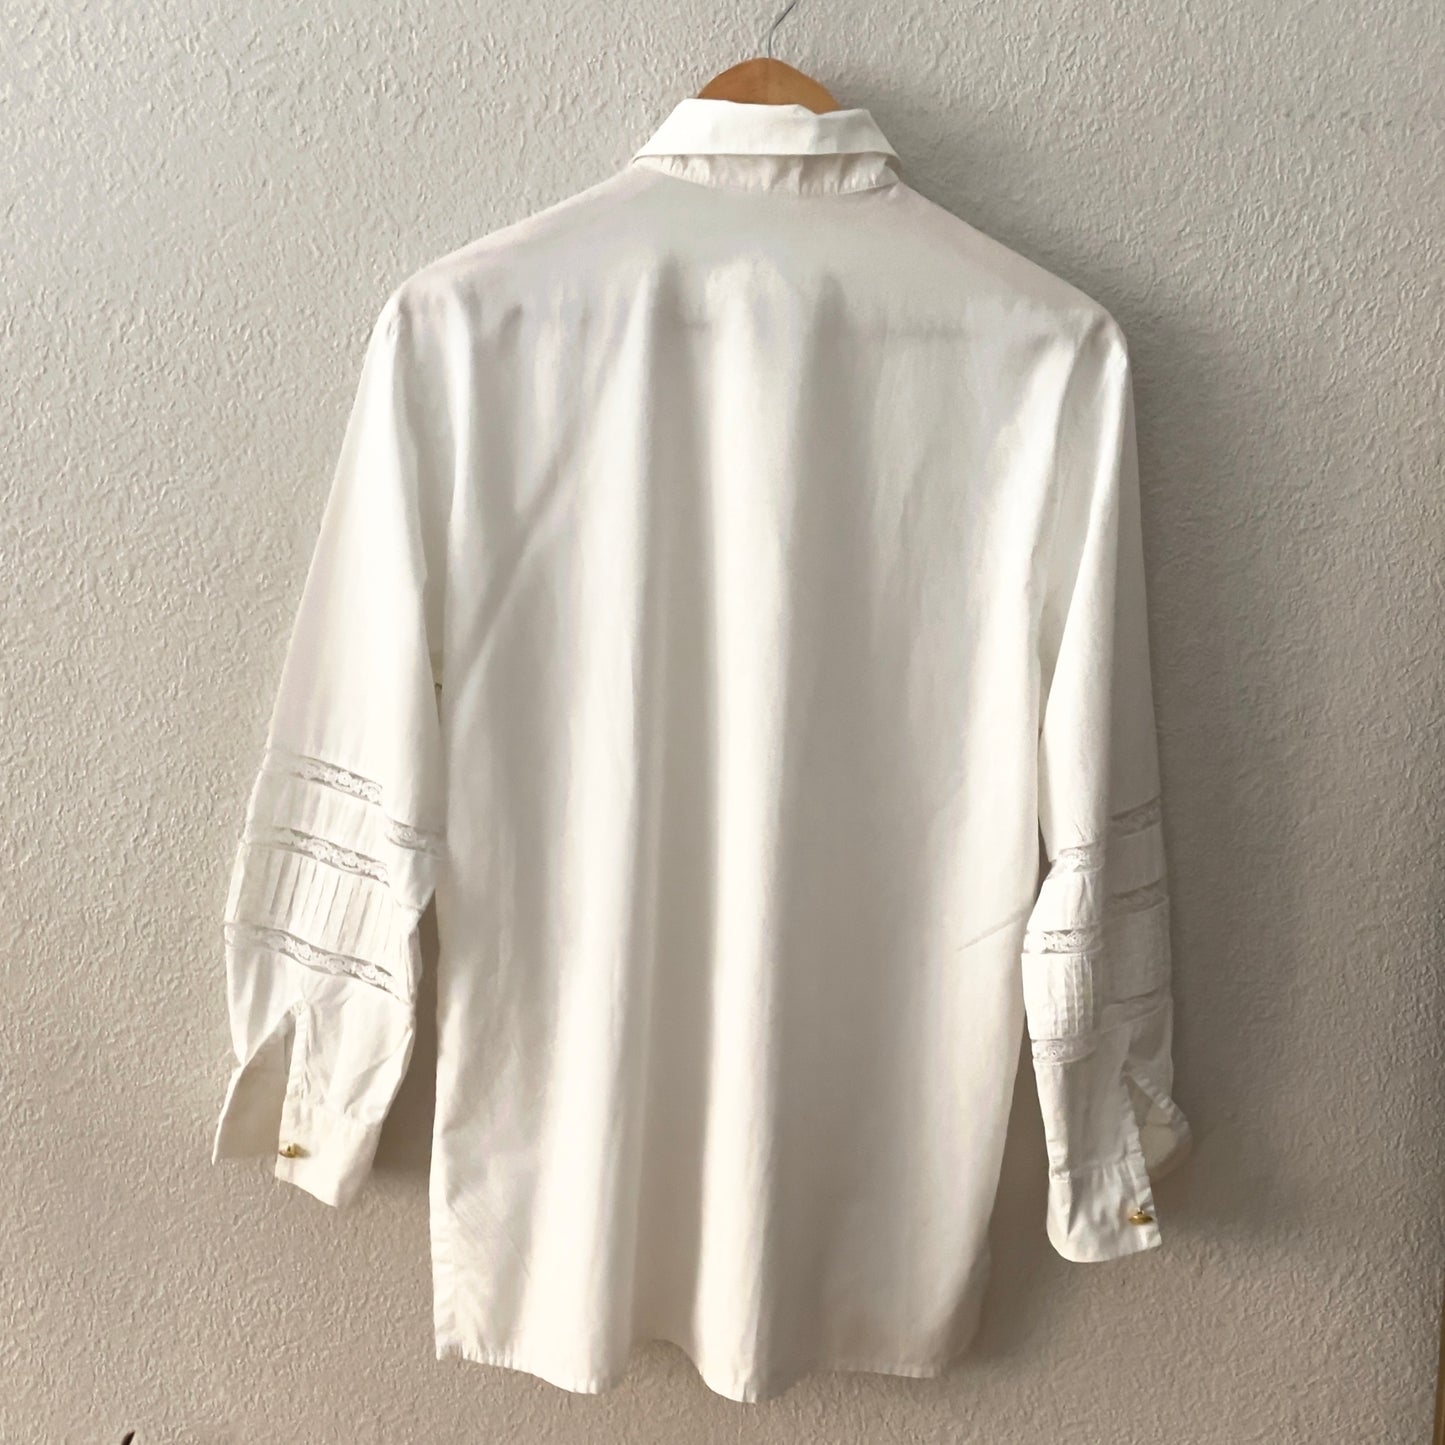 Vintage Betty Barclay Cotton Blouse